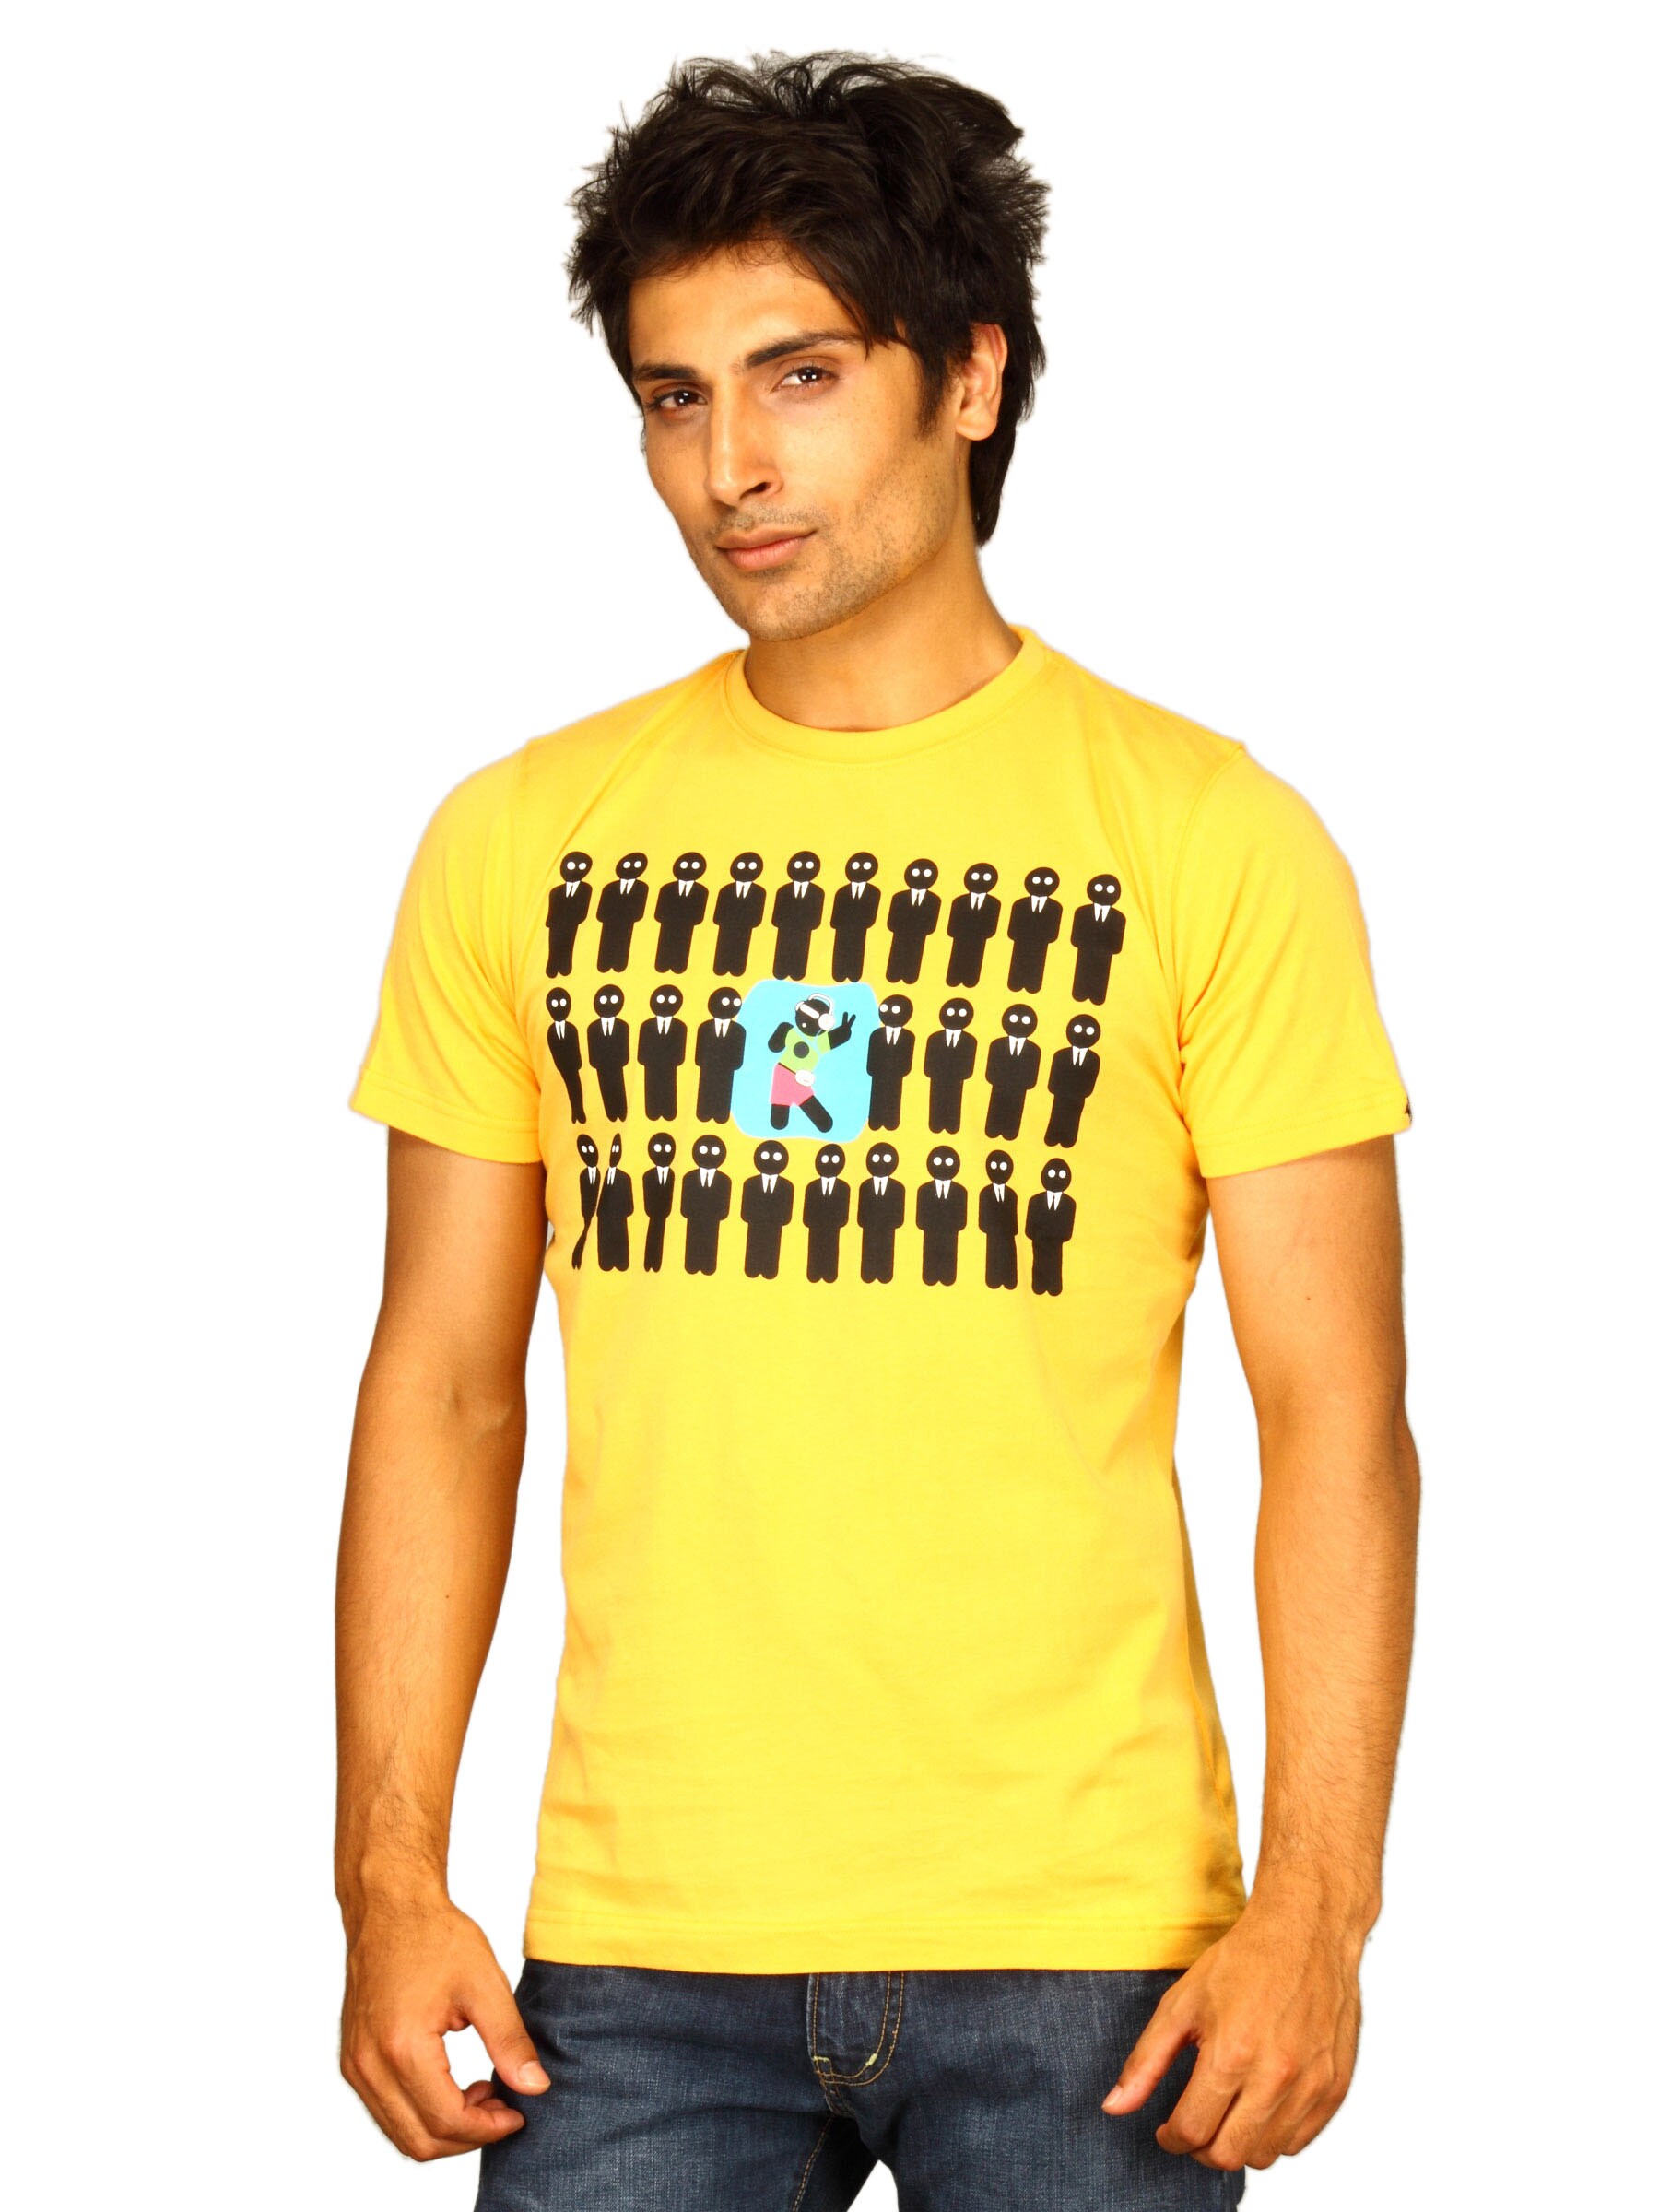 Probase Men's Standing Out Yellow T-shirt